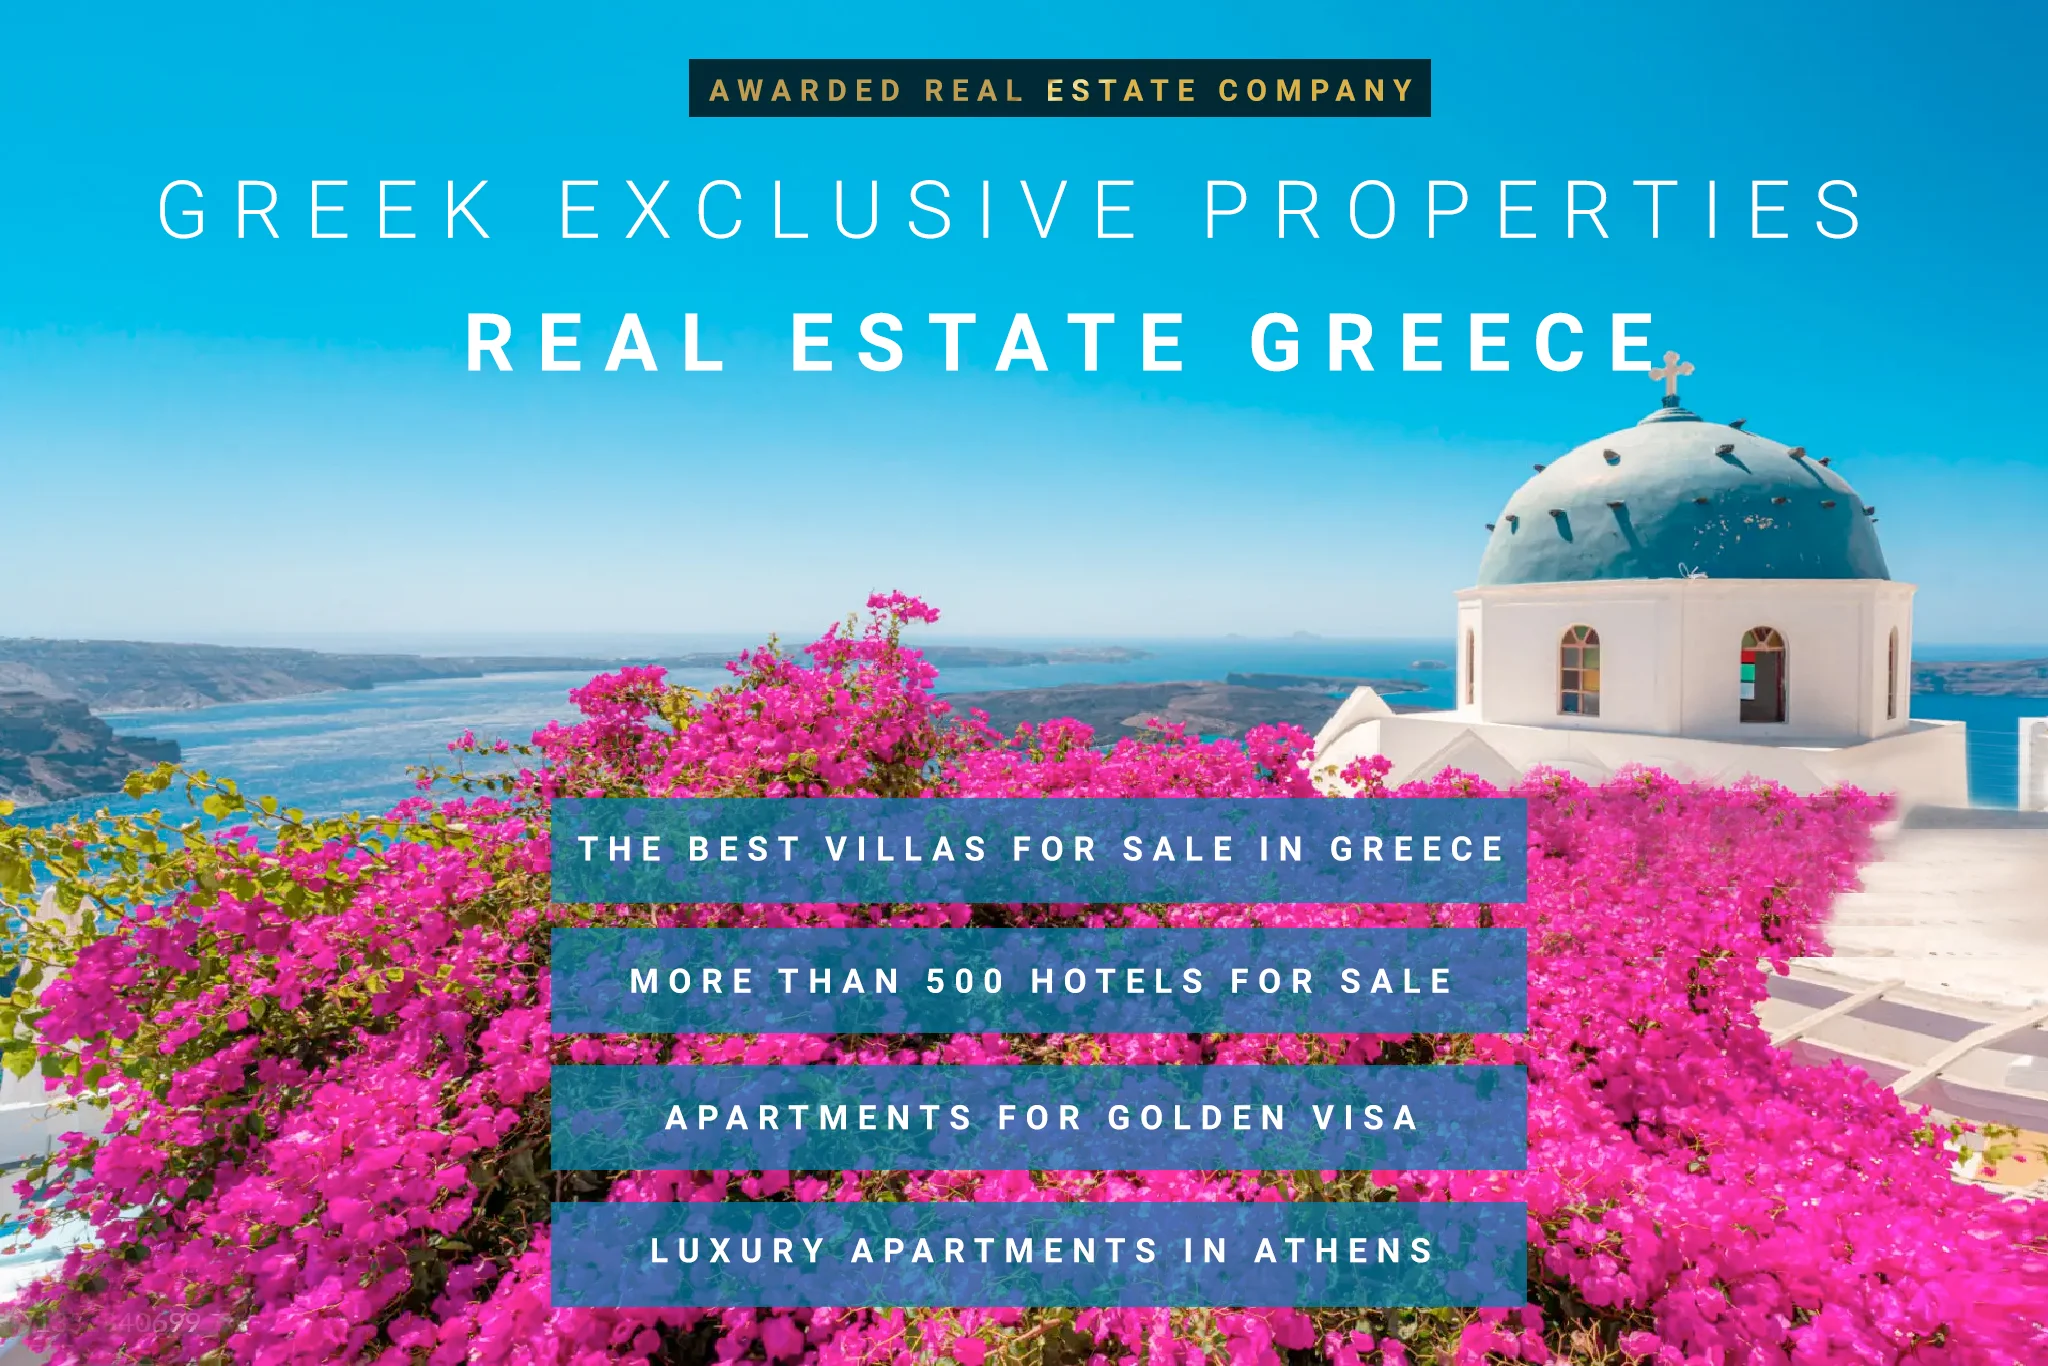 Real Estate Greece, Houses in Greece, Property in Greece, Greece Real Estate, Greek Real Estate, Houses for sale in Greece, Homes for sale in Greece